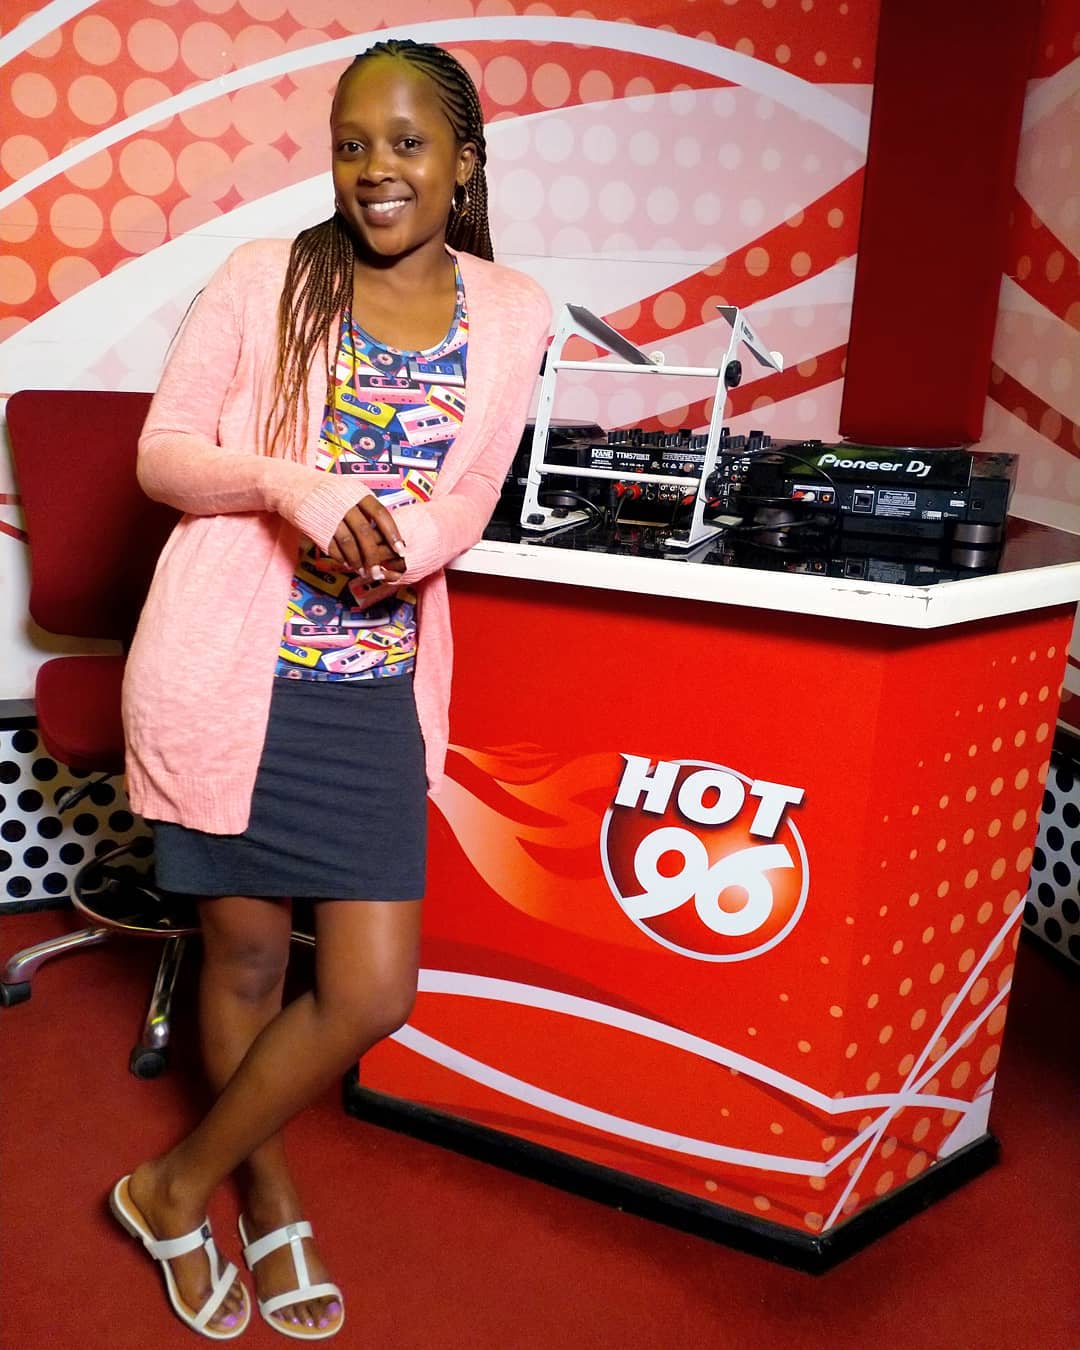 2018-09-15-Shix Kapienga: Is Cute And All While Posing Next To The Decks At Hot 96 FM Studio, Where Is MC Jesse?